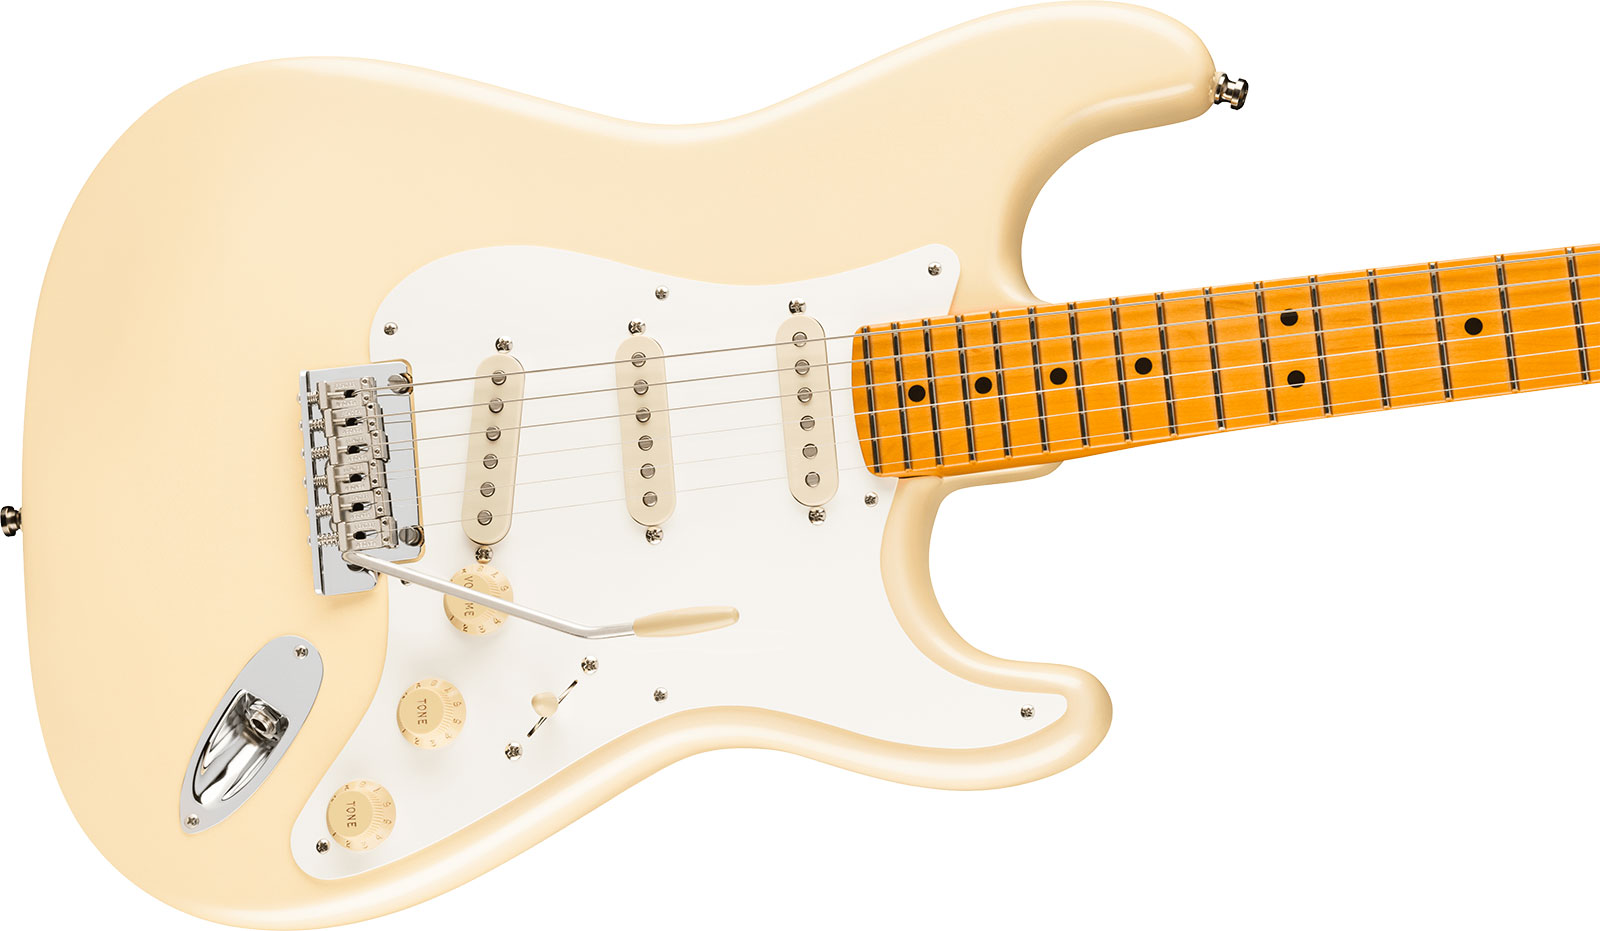 Fender Lincoln Brewster Strat Usa Signature 3s Dimarzio Trem Mn - Olympic Pearl - Retro rock electric guitar - Variation 2